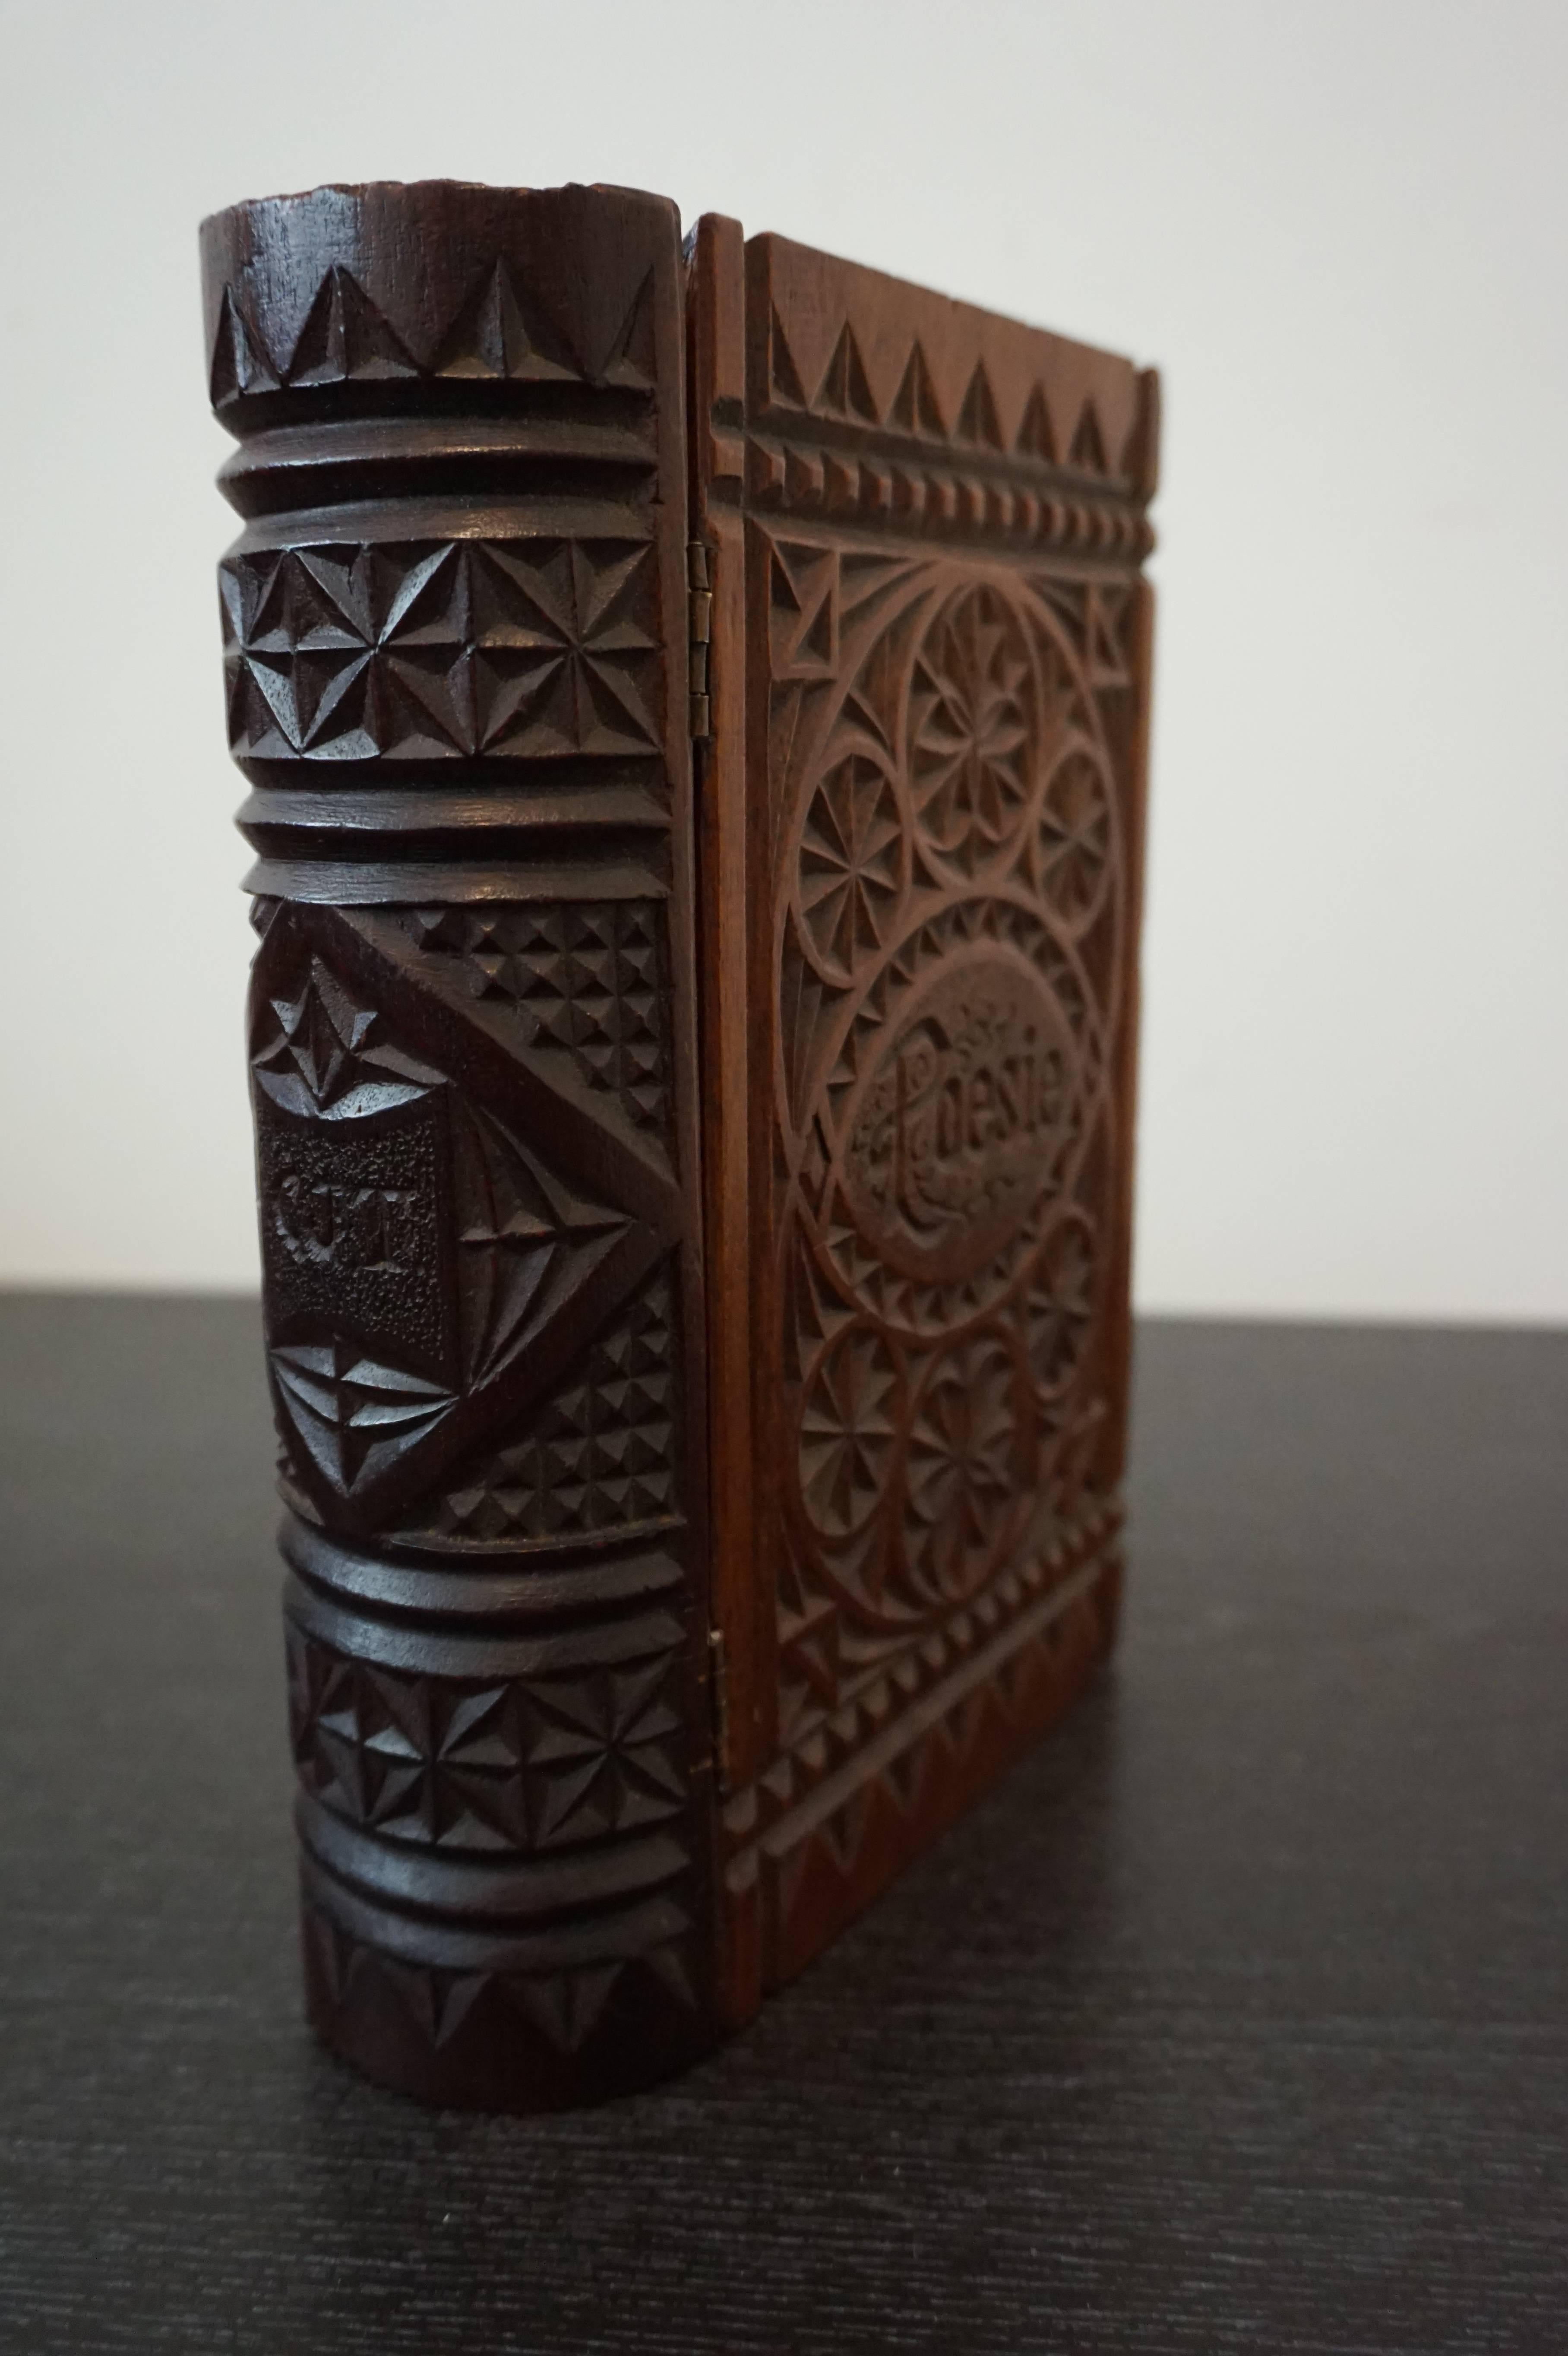 Gothic Revival Rare mid 19th Century Carved Mahogany German Kerbschnitt Book Shaped Jewelry Box